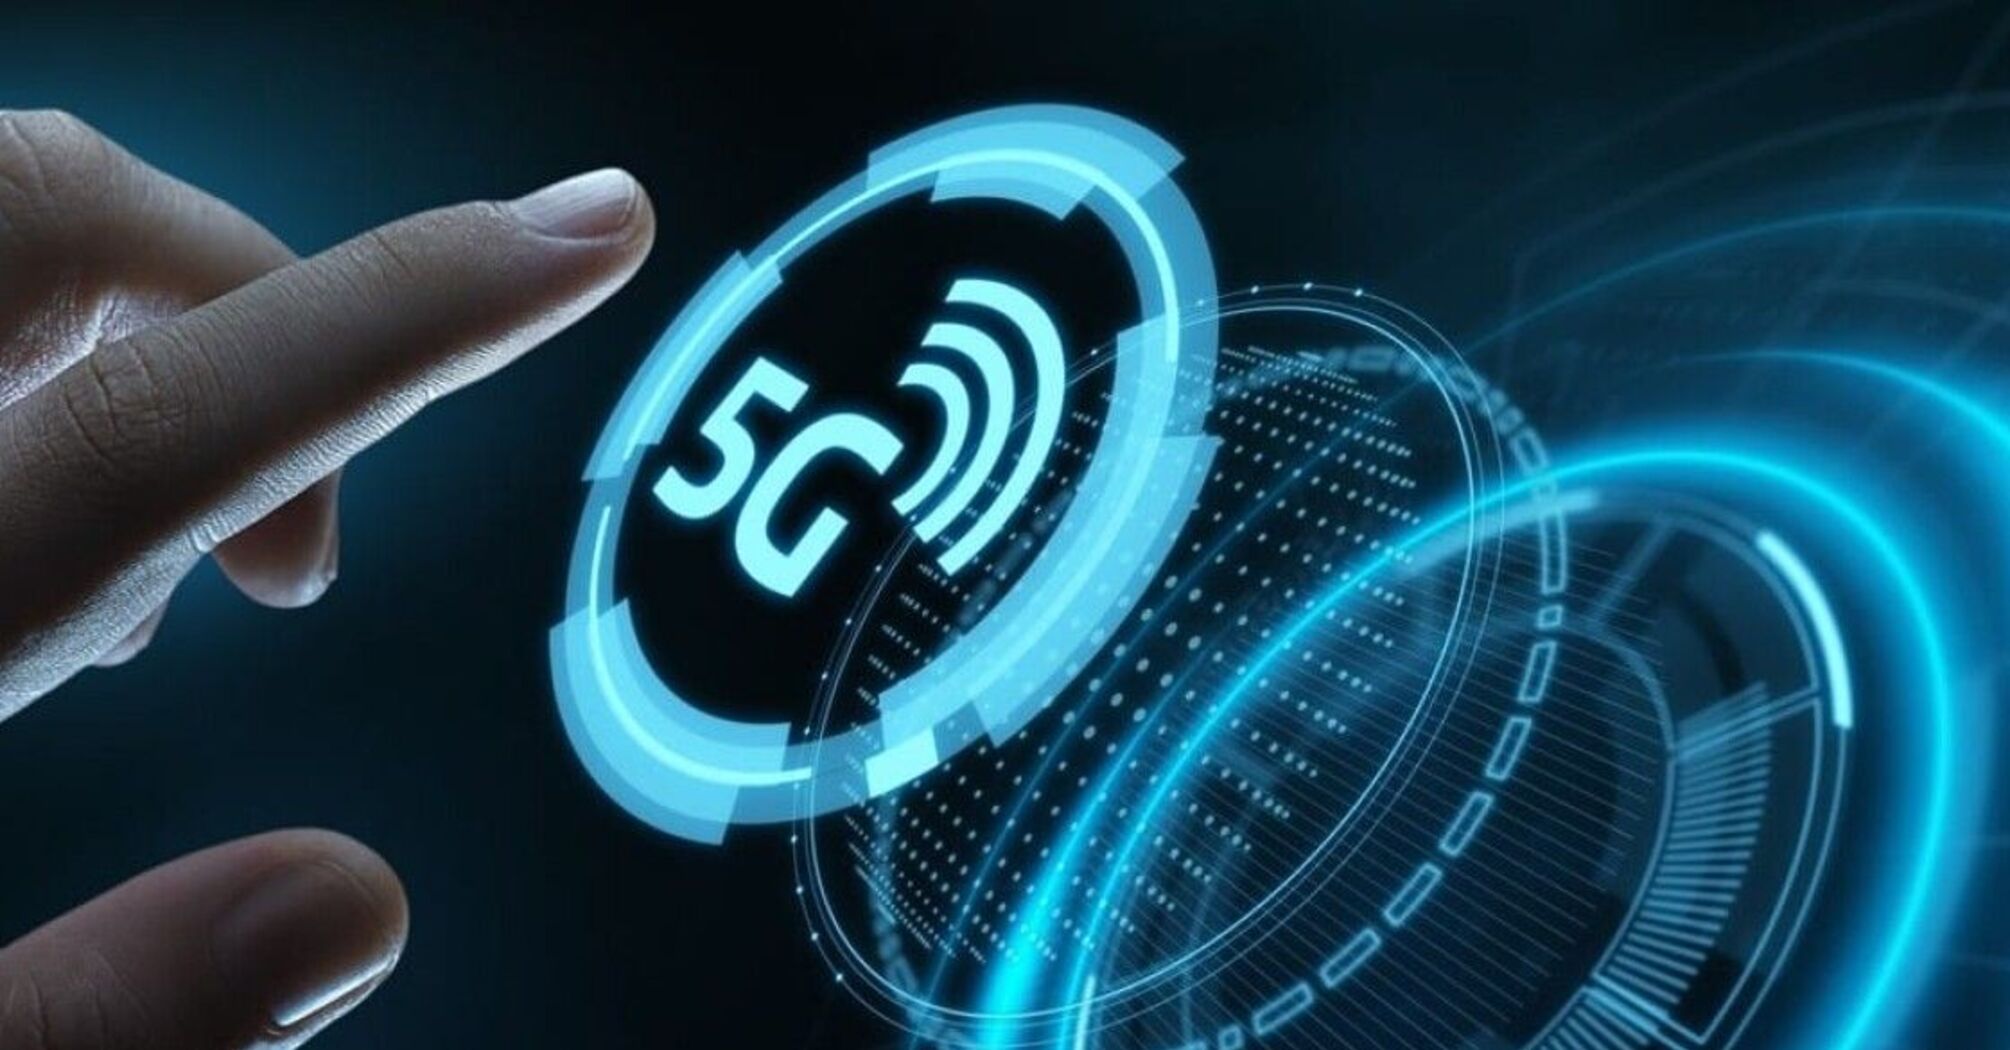 For the first time in Ukraine: Vodafone launched 5G in test mode